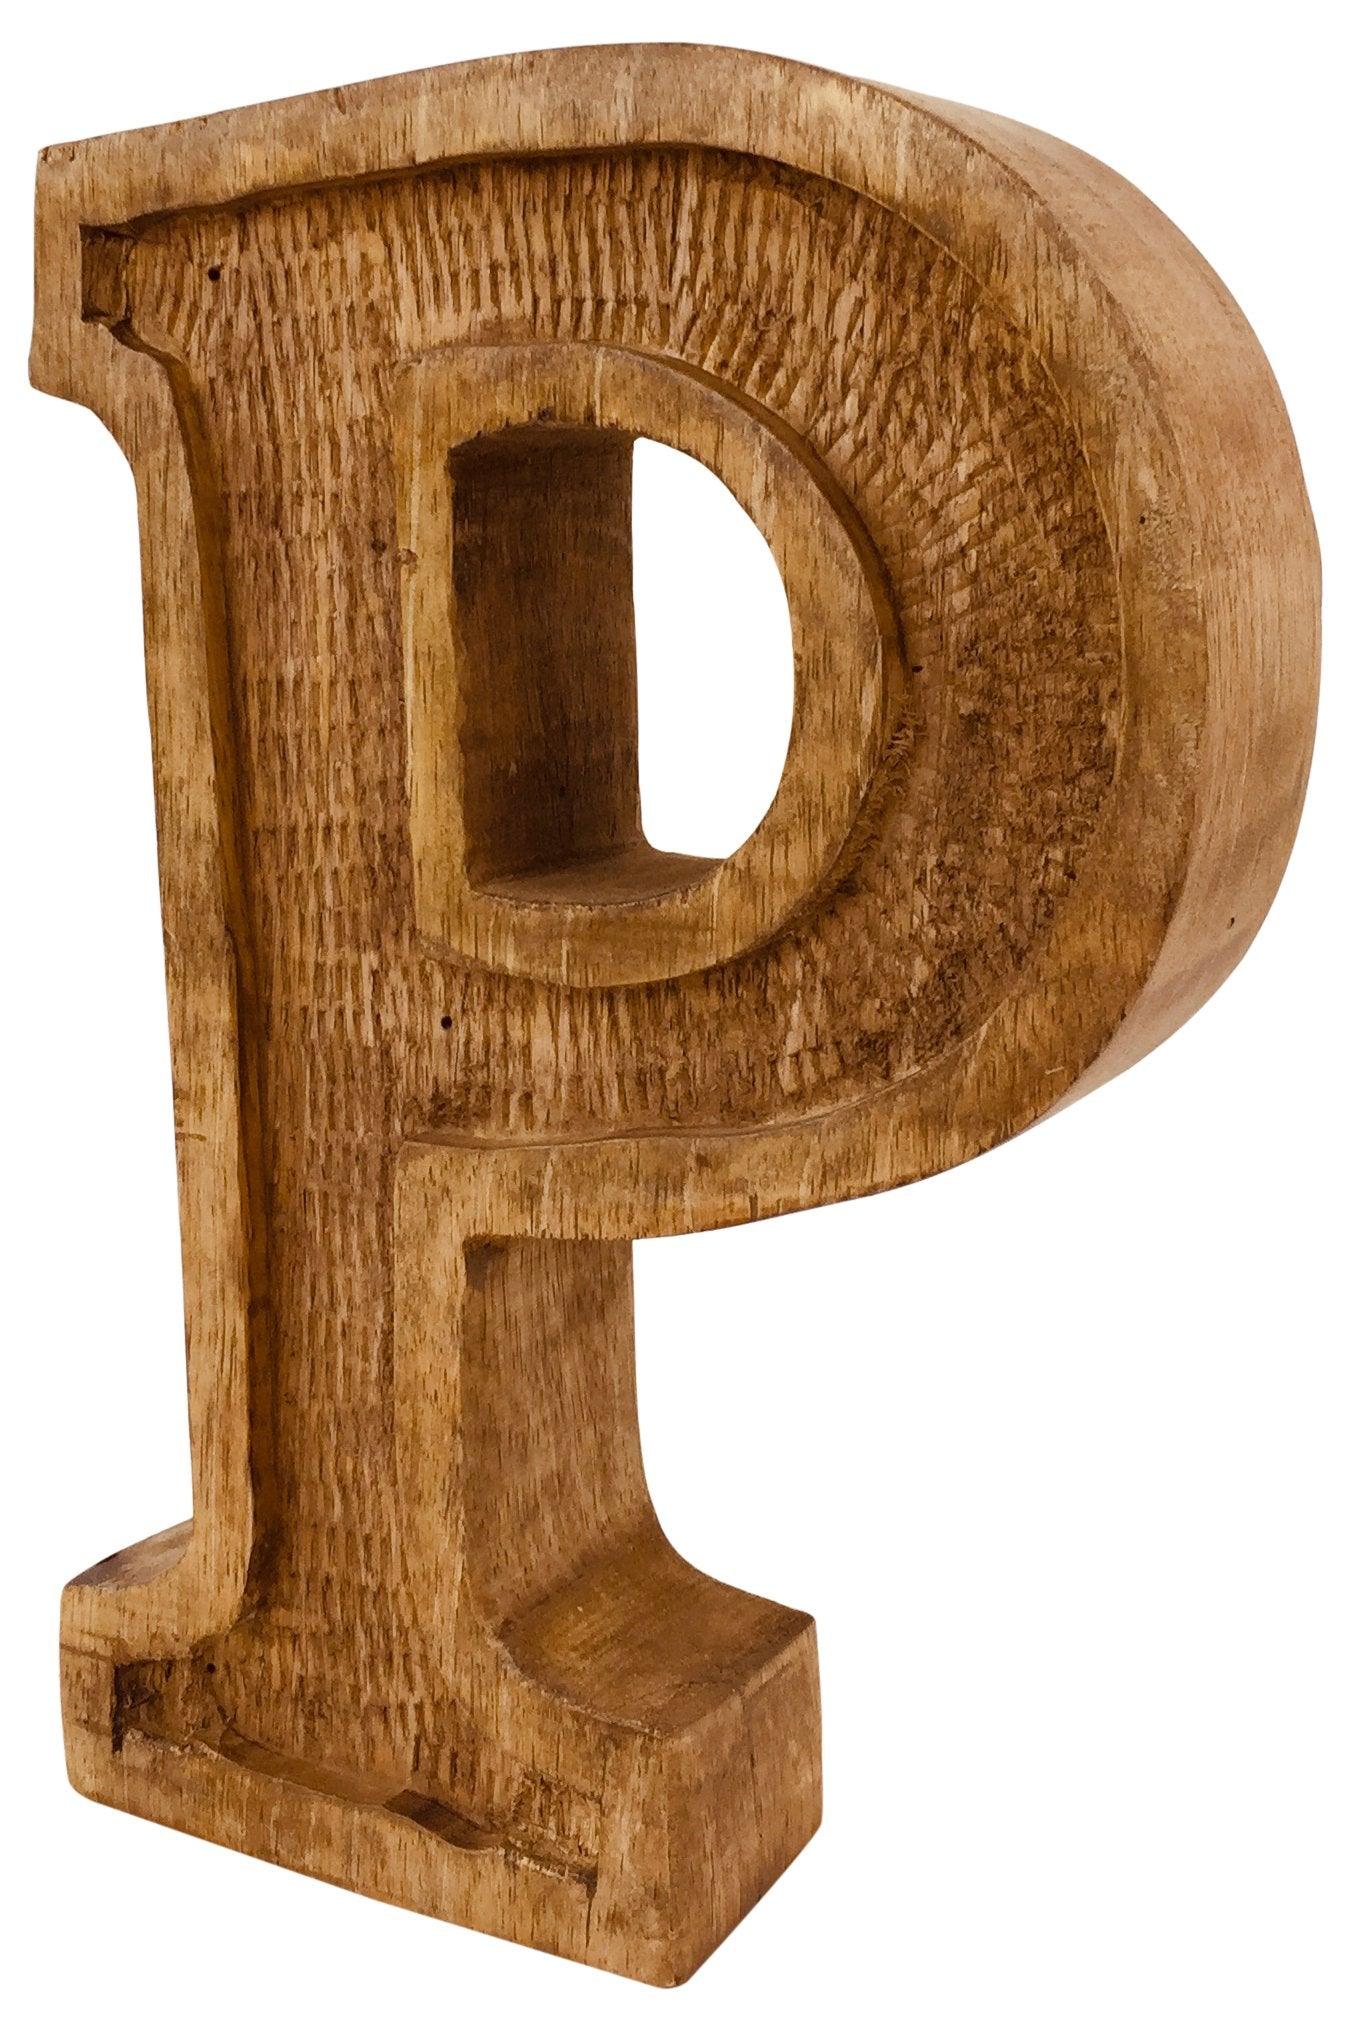 View Hand Carved Wooden Embossed Letter P information